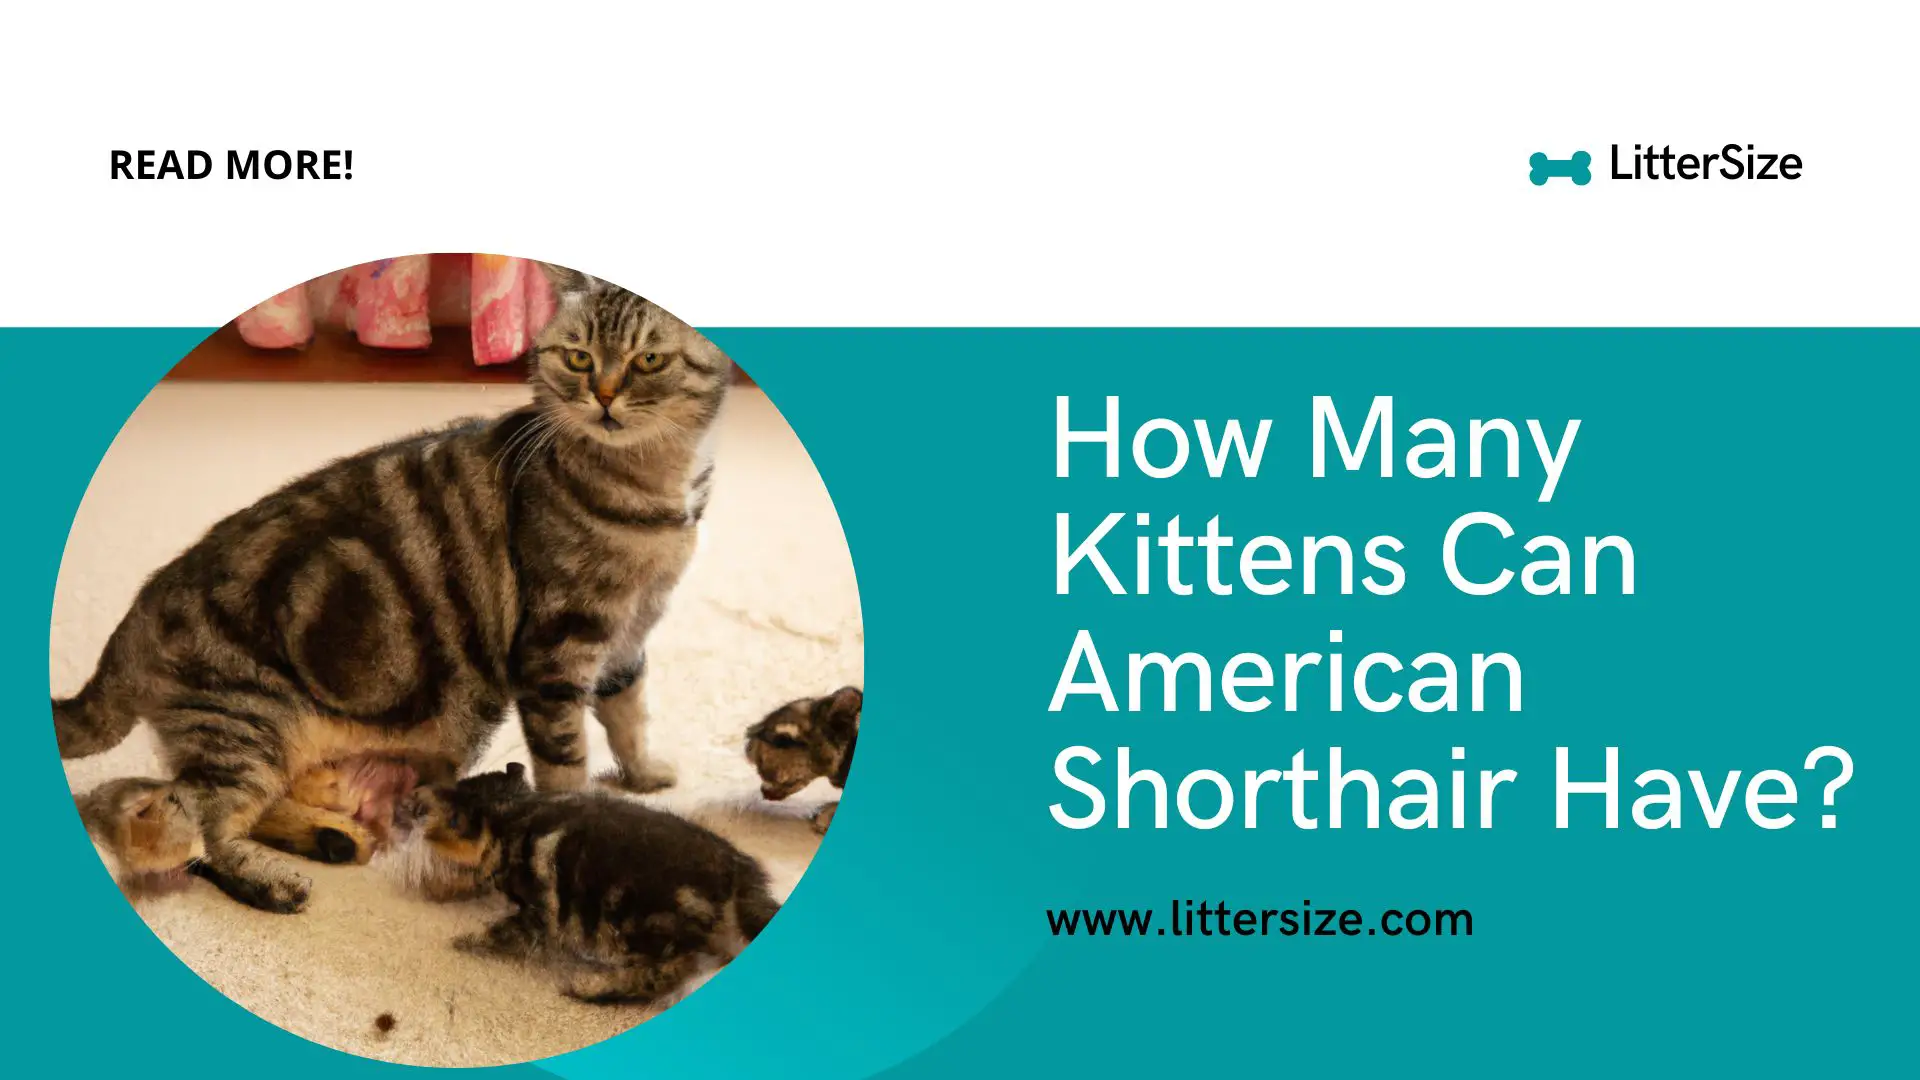 How Many Kittens Can American Shorthair Have?